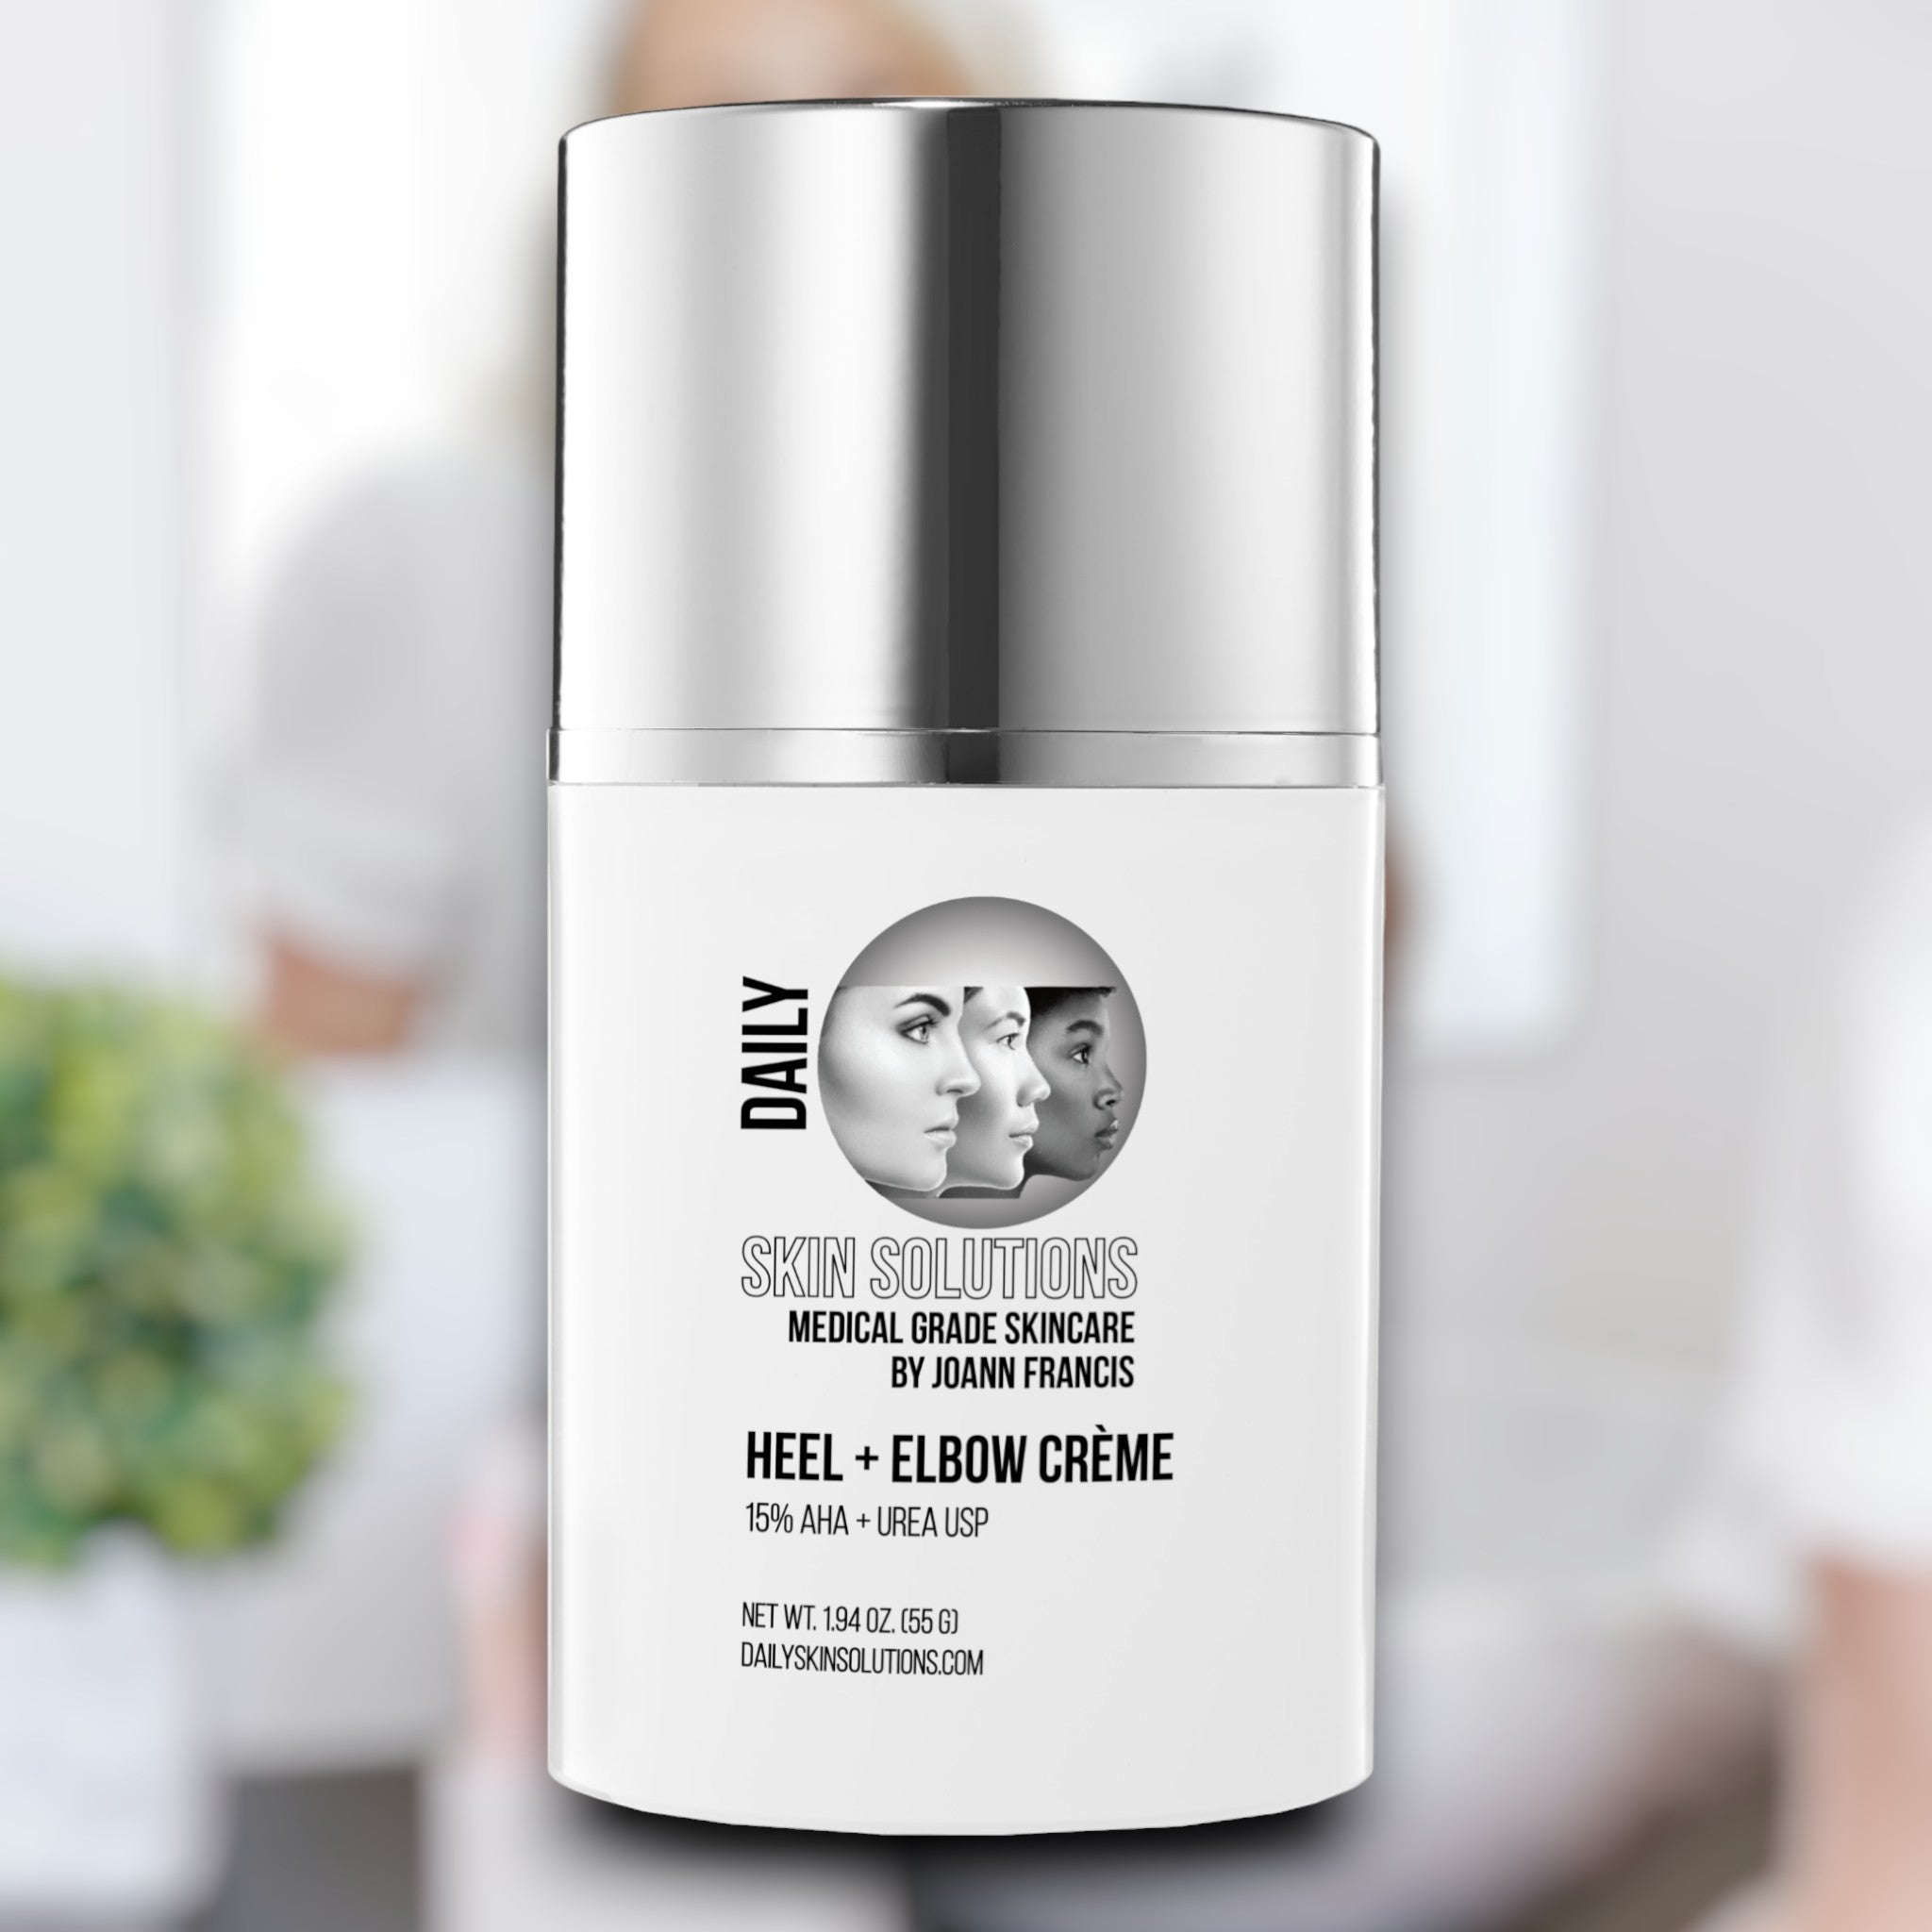 Heel + Elbow Creme by Daily Skin Solutions